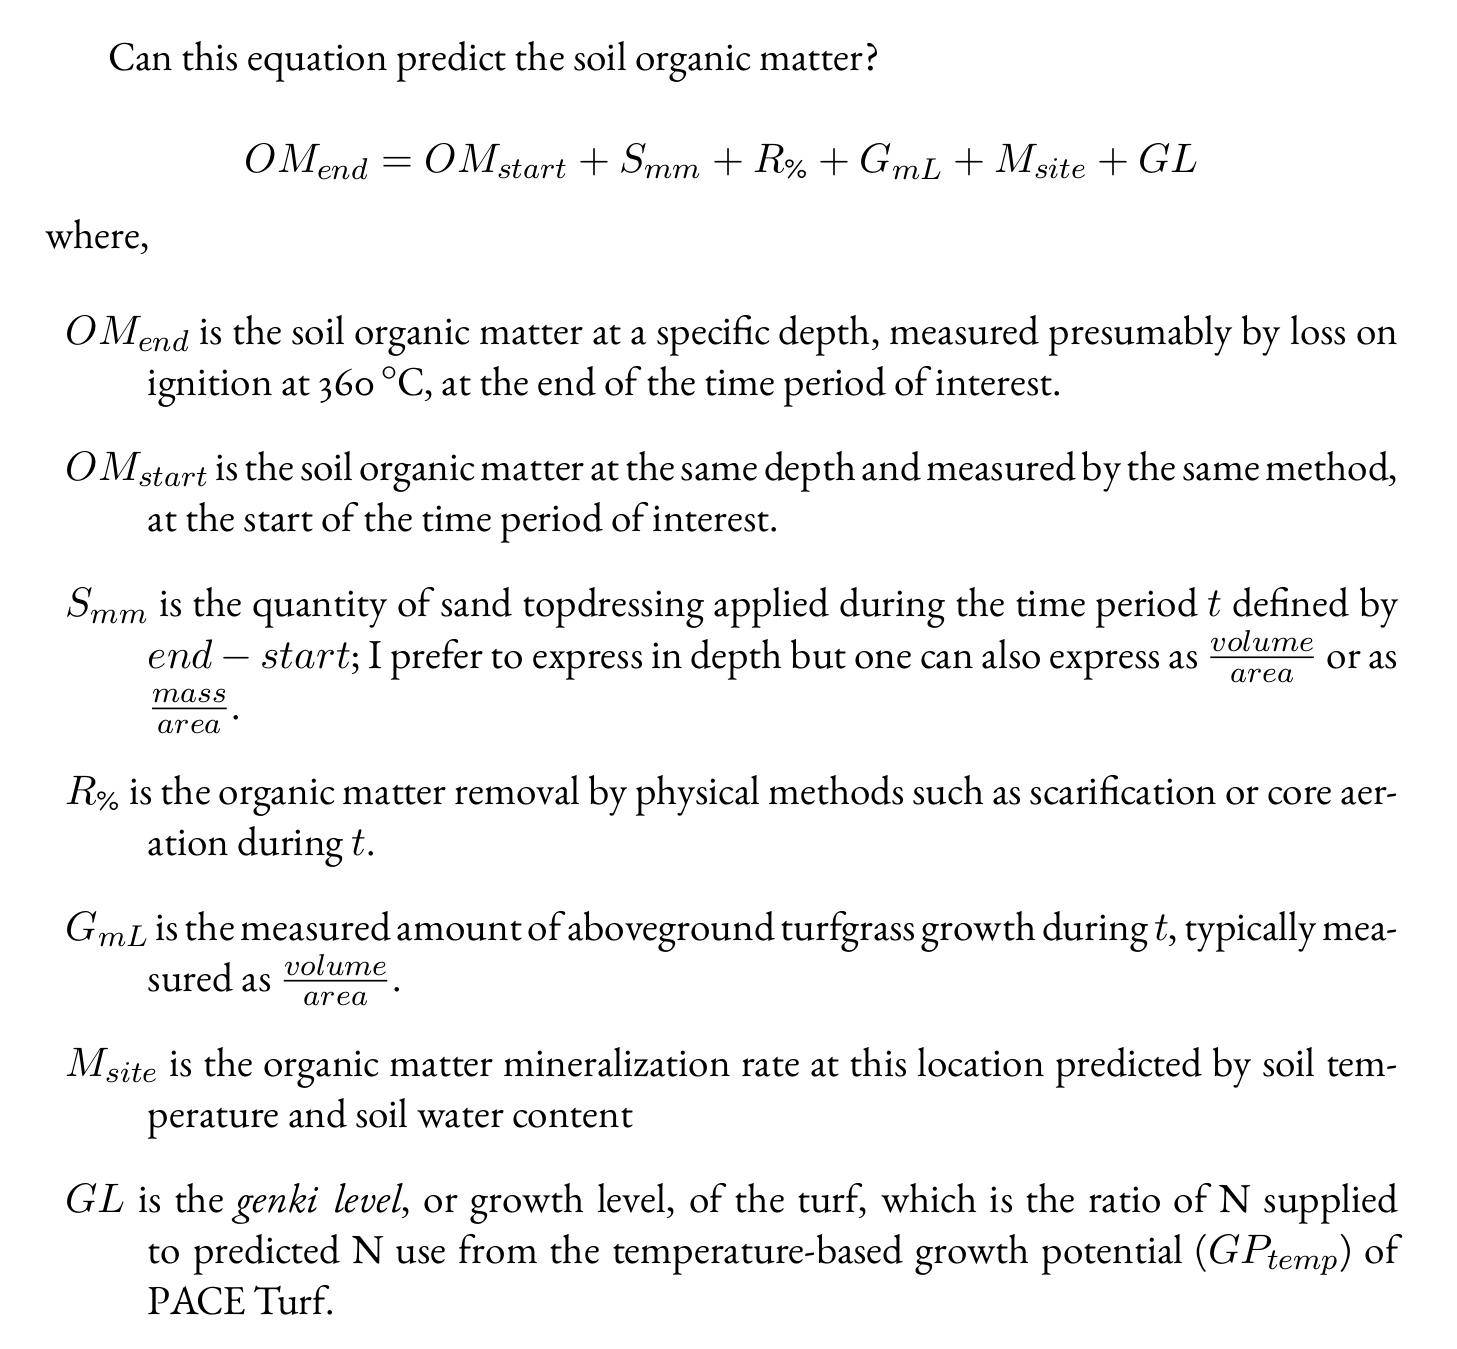 Does this equation predict organic matter in turfgrass soils?